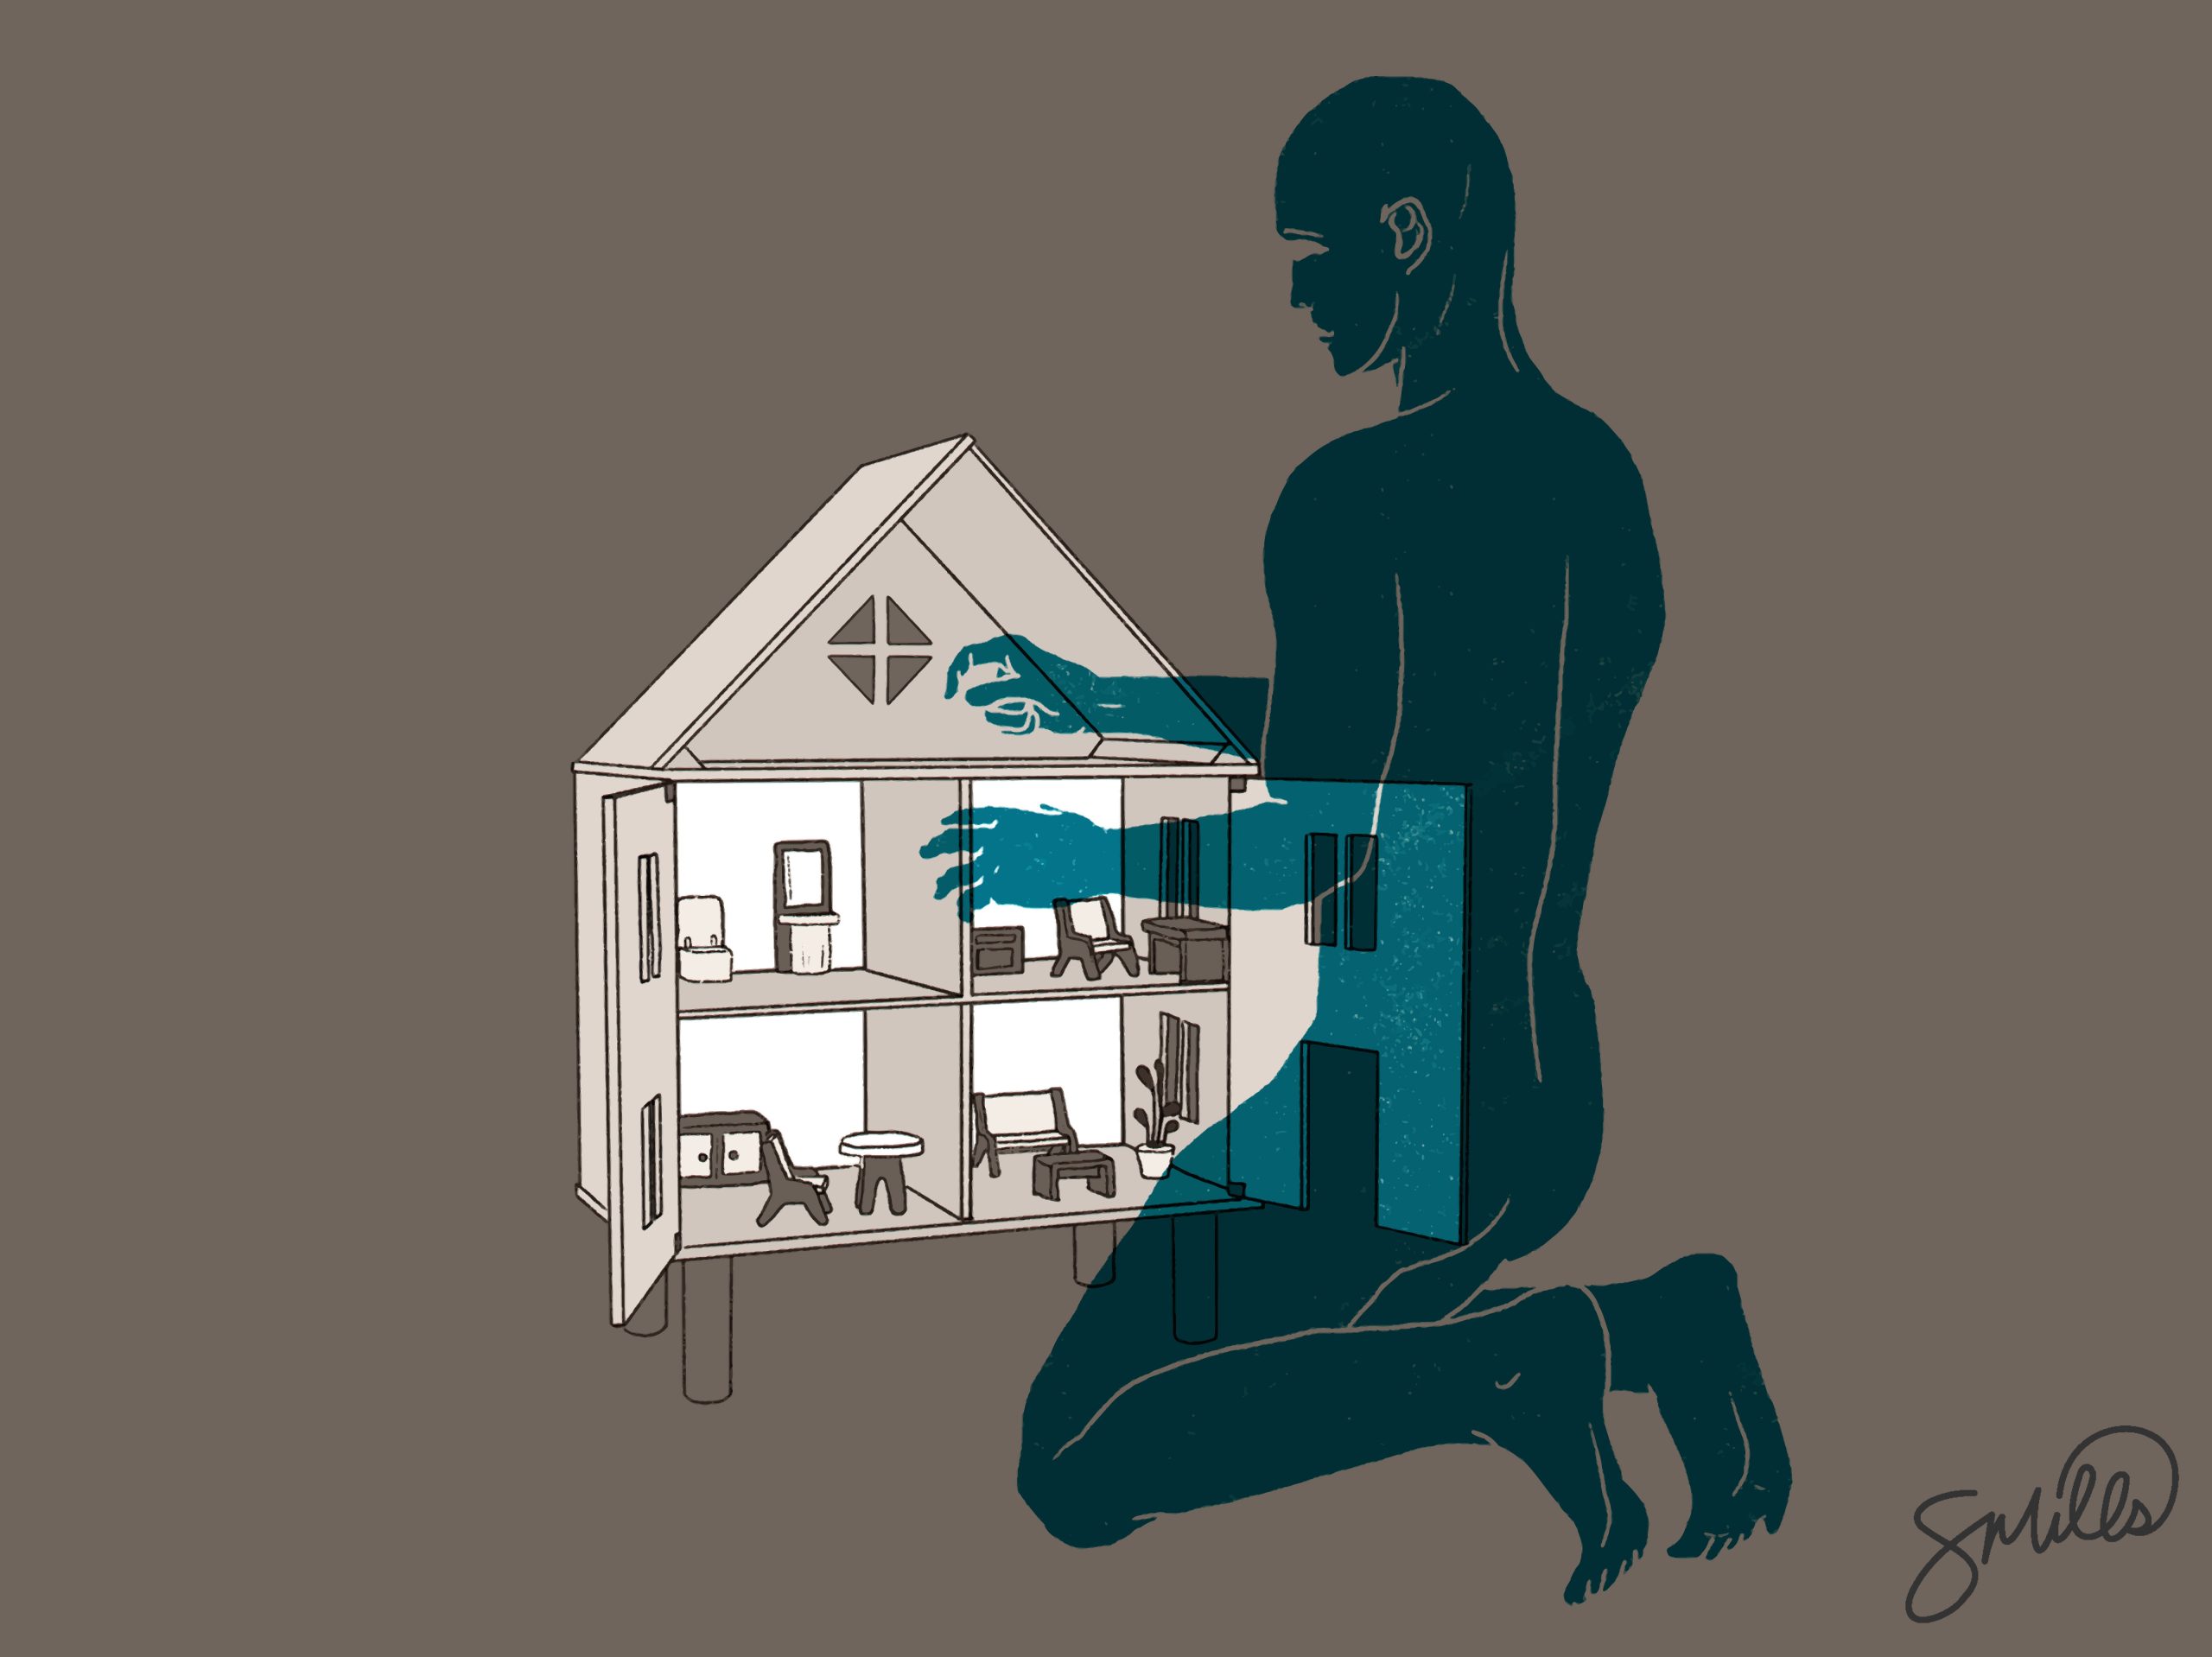 Image: On a grey background, a ghostly teal figure on their knees arranging pieces in a doll house. Illustration by Summer Mills.